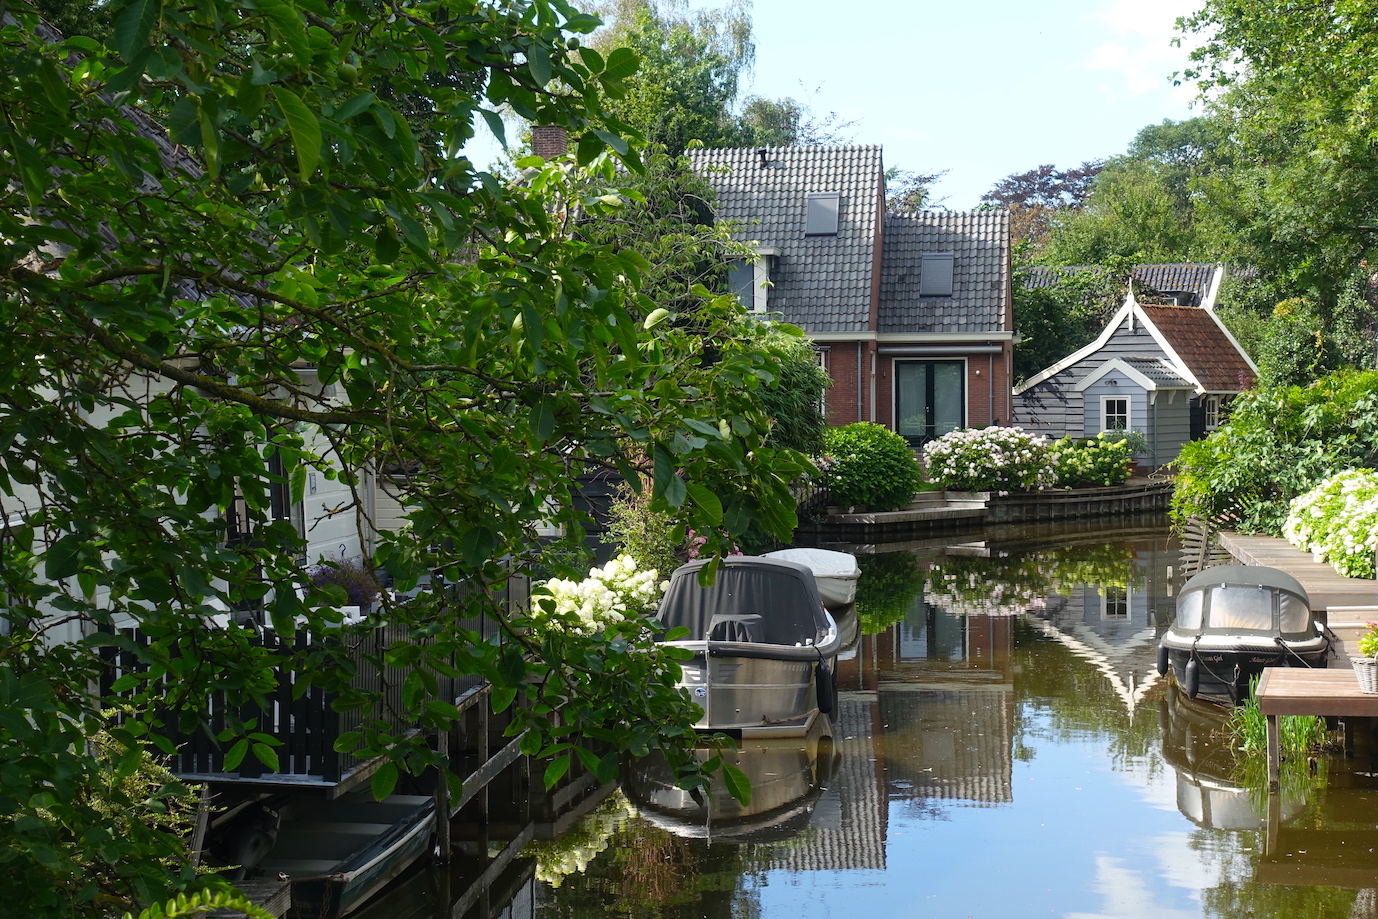 A stunning view of a canal in the Amsterdam countryside, in Broek in Waterland. Water reflections of houses and boats